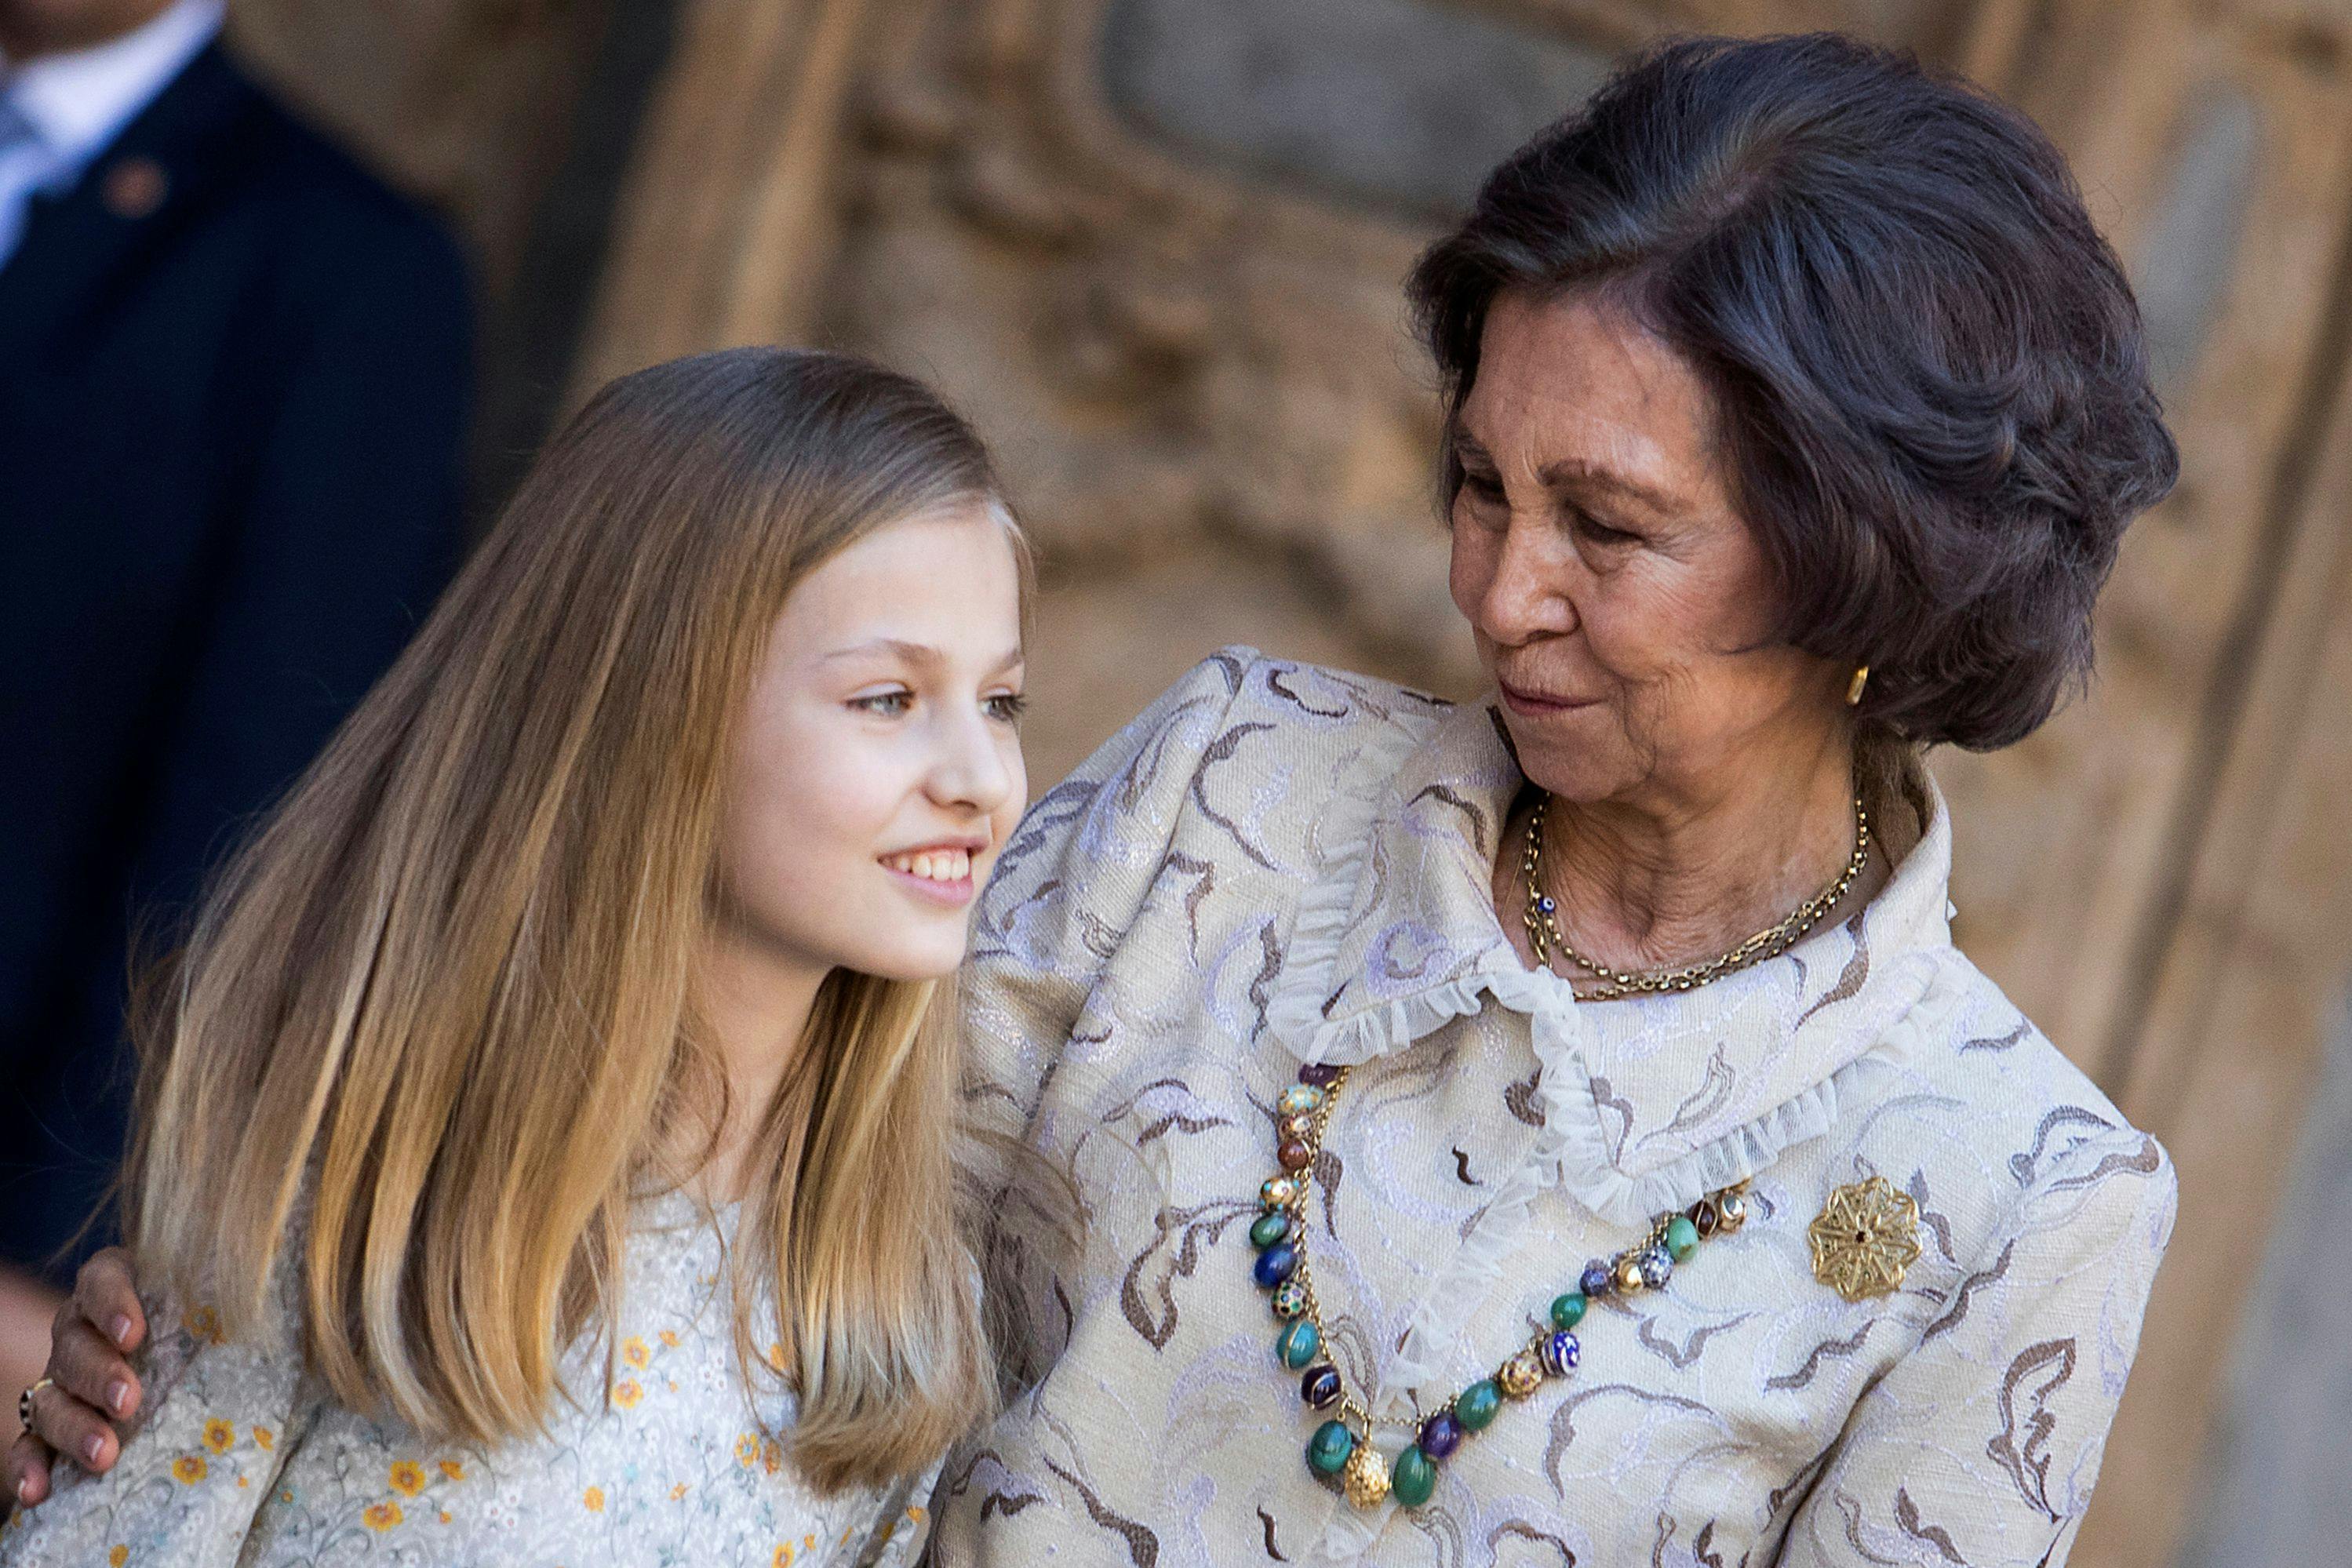 Princess Leonor of Spain (L) stands with her grandmother former Queen Sofia after attending the traditional Easter Sunday Mass of Resurrection in Palma de Mallorca on April 1, 2018. / AFP PHOTO / JAIME REINA